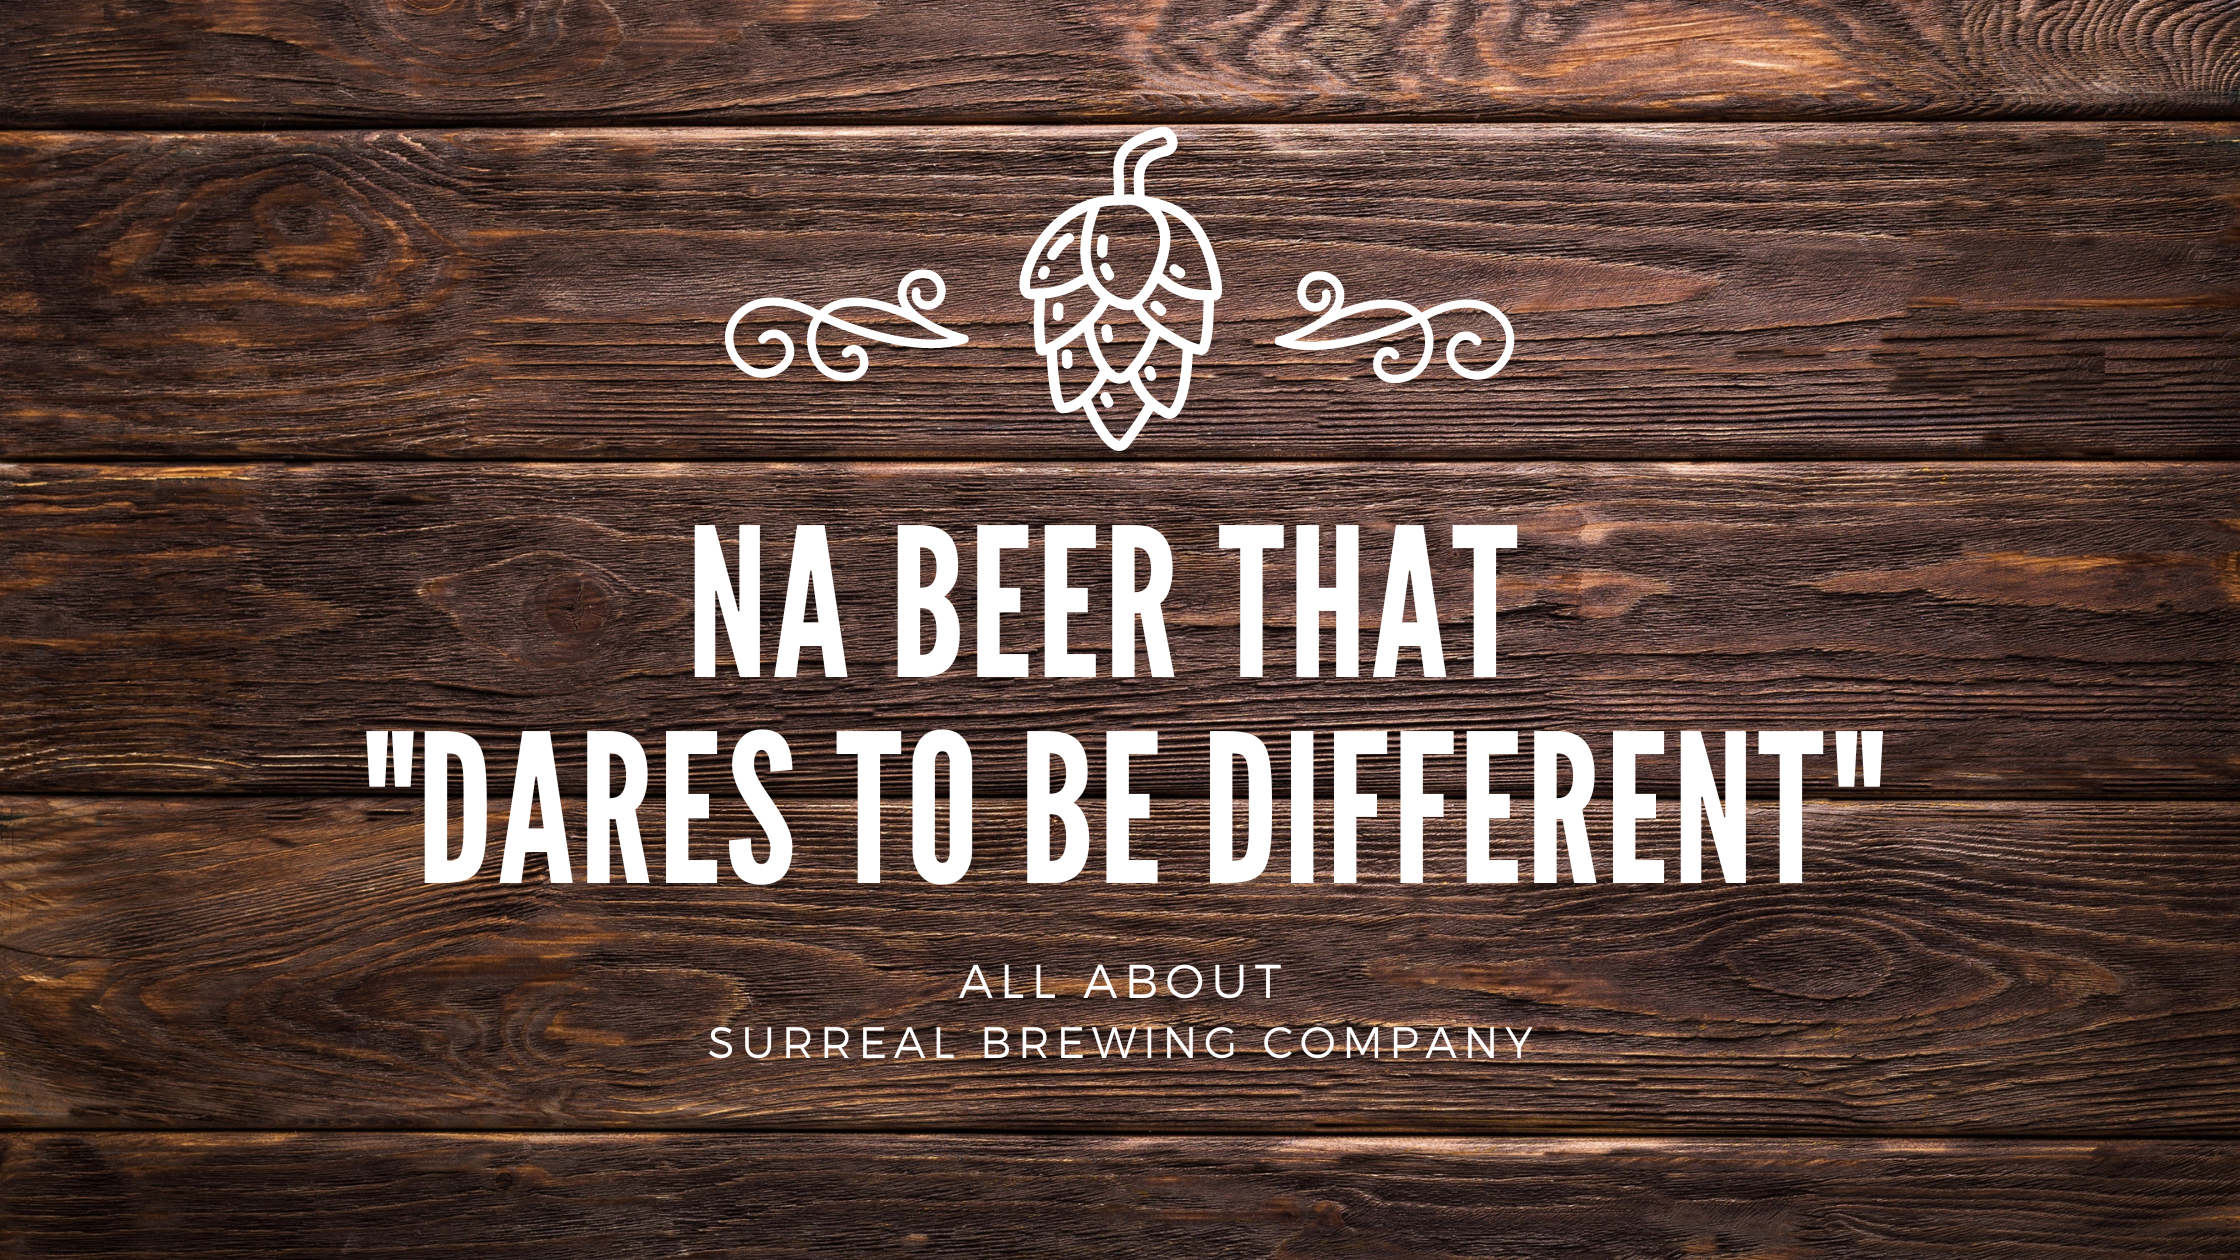 NA Beer that “Dares to Be Different”: All About Surreal Brewing Co.